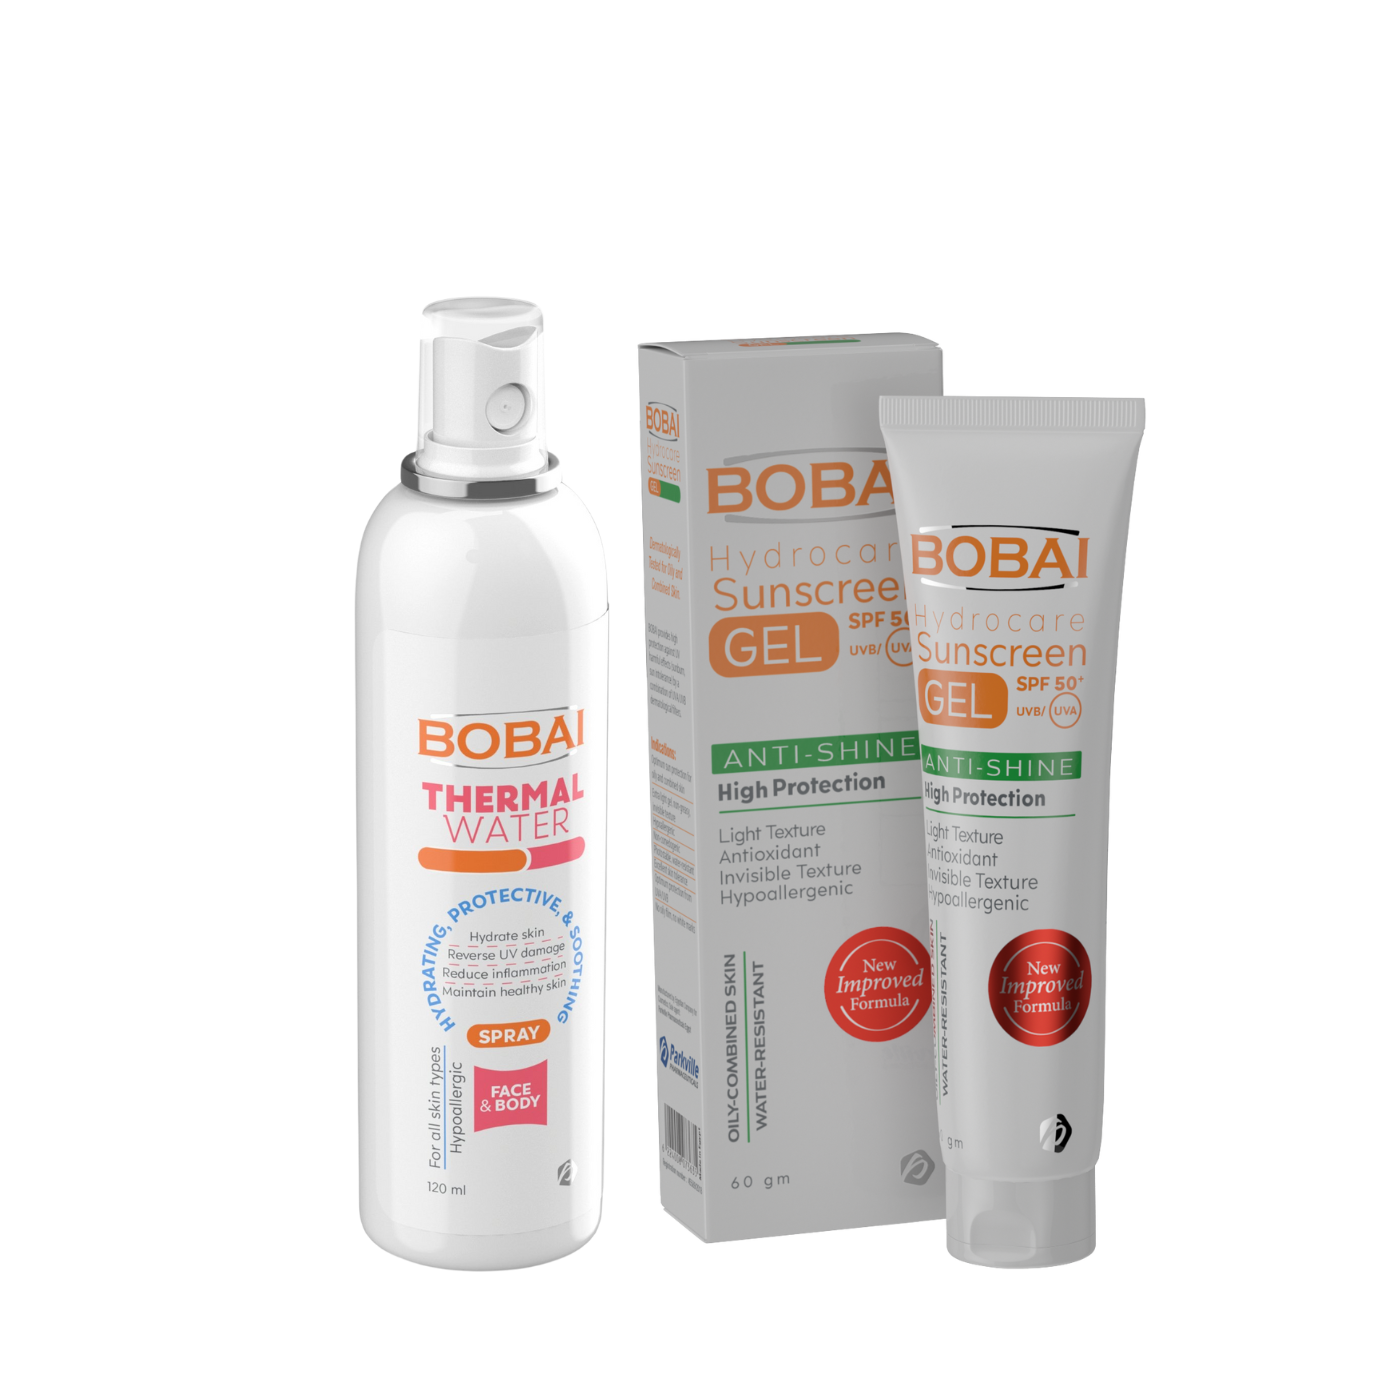 BOBAI Sunscreen Hydrocare Gel SPF 50+ and BOBAI Thermal Water Offer Pack